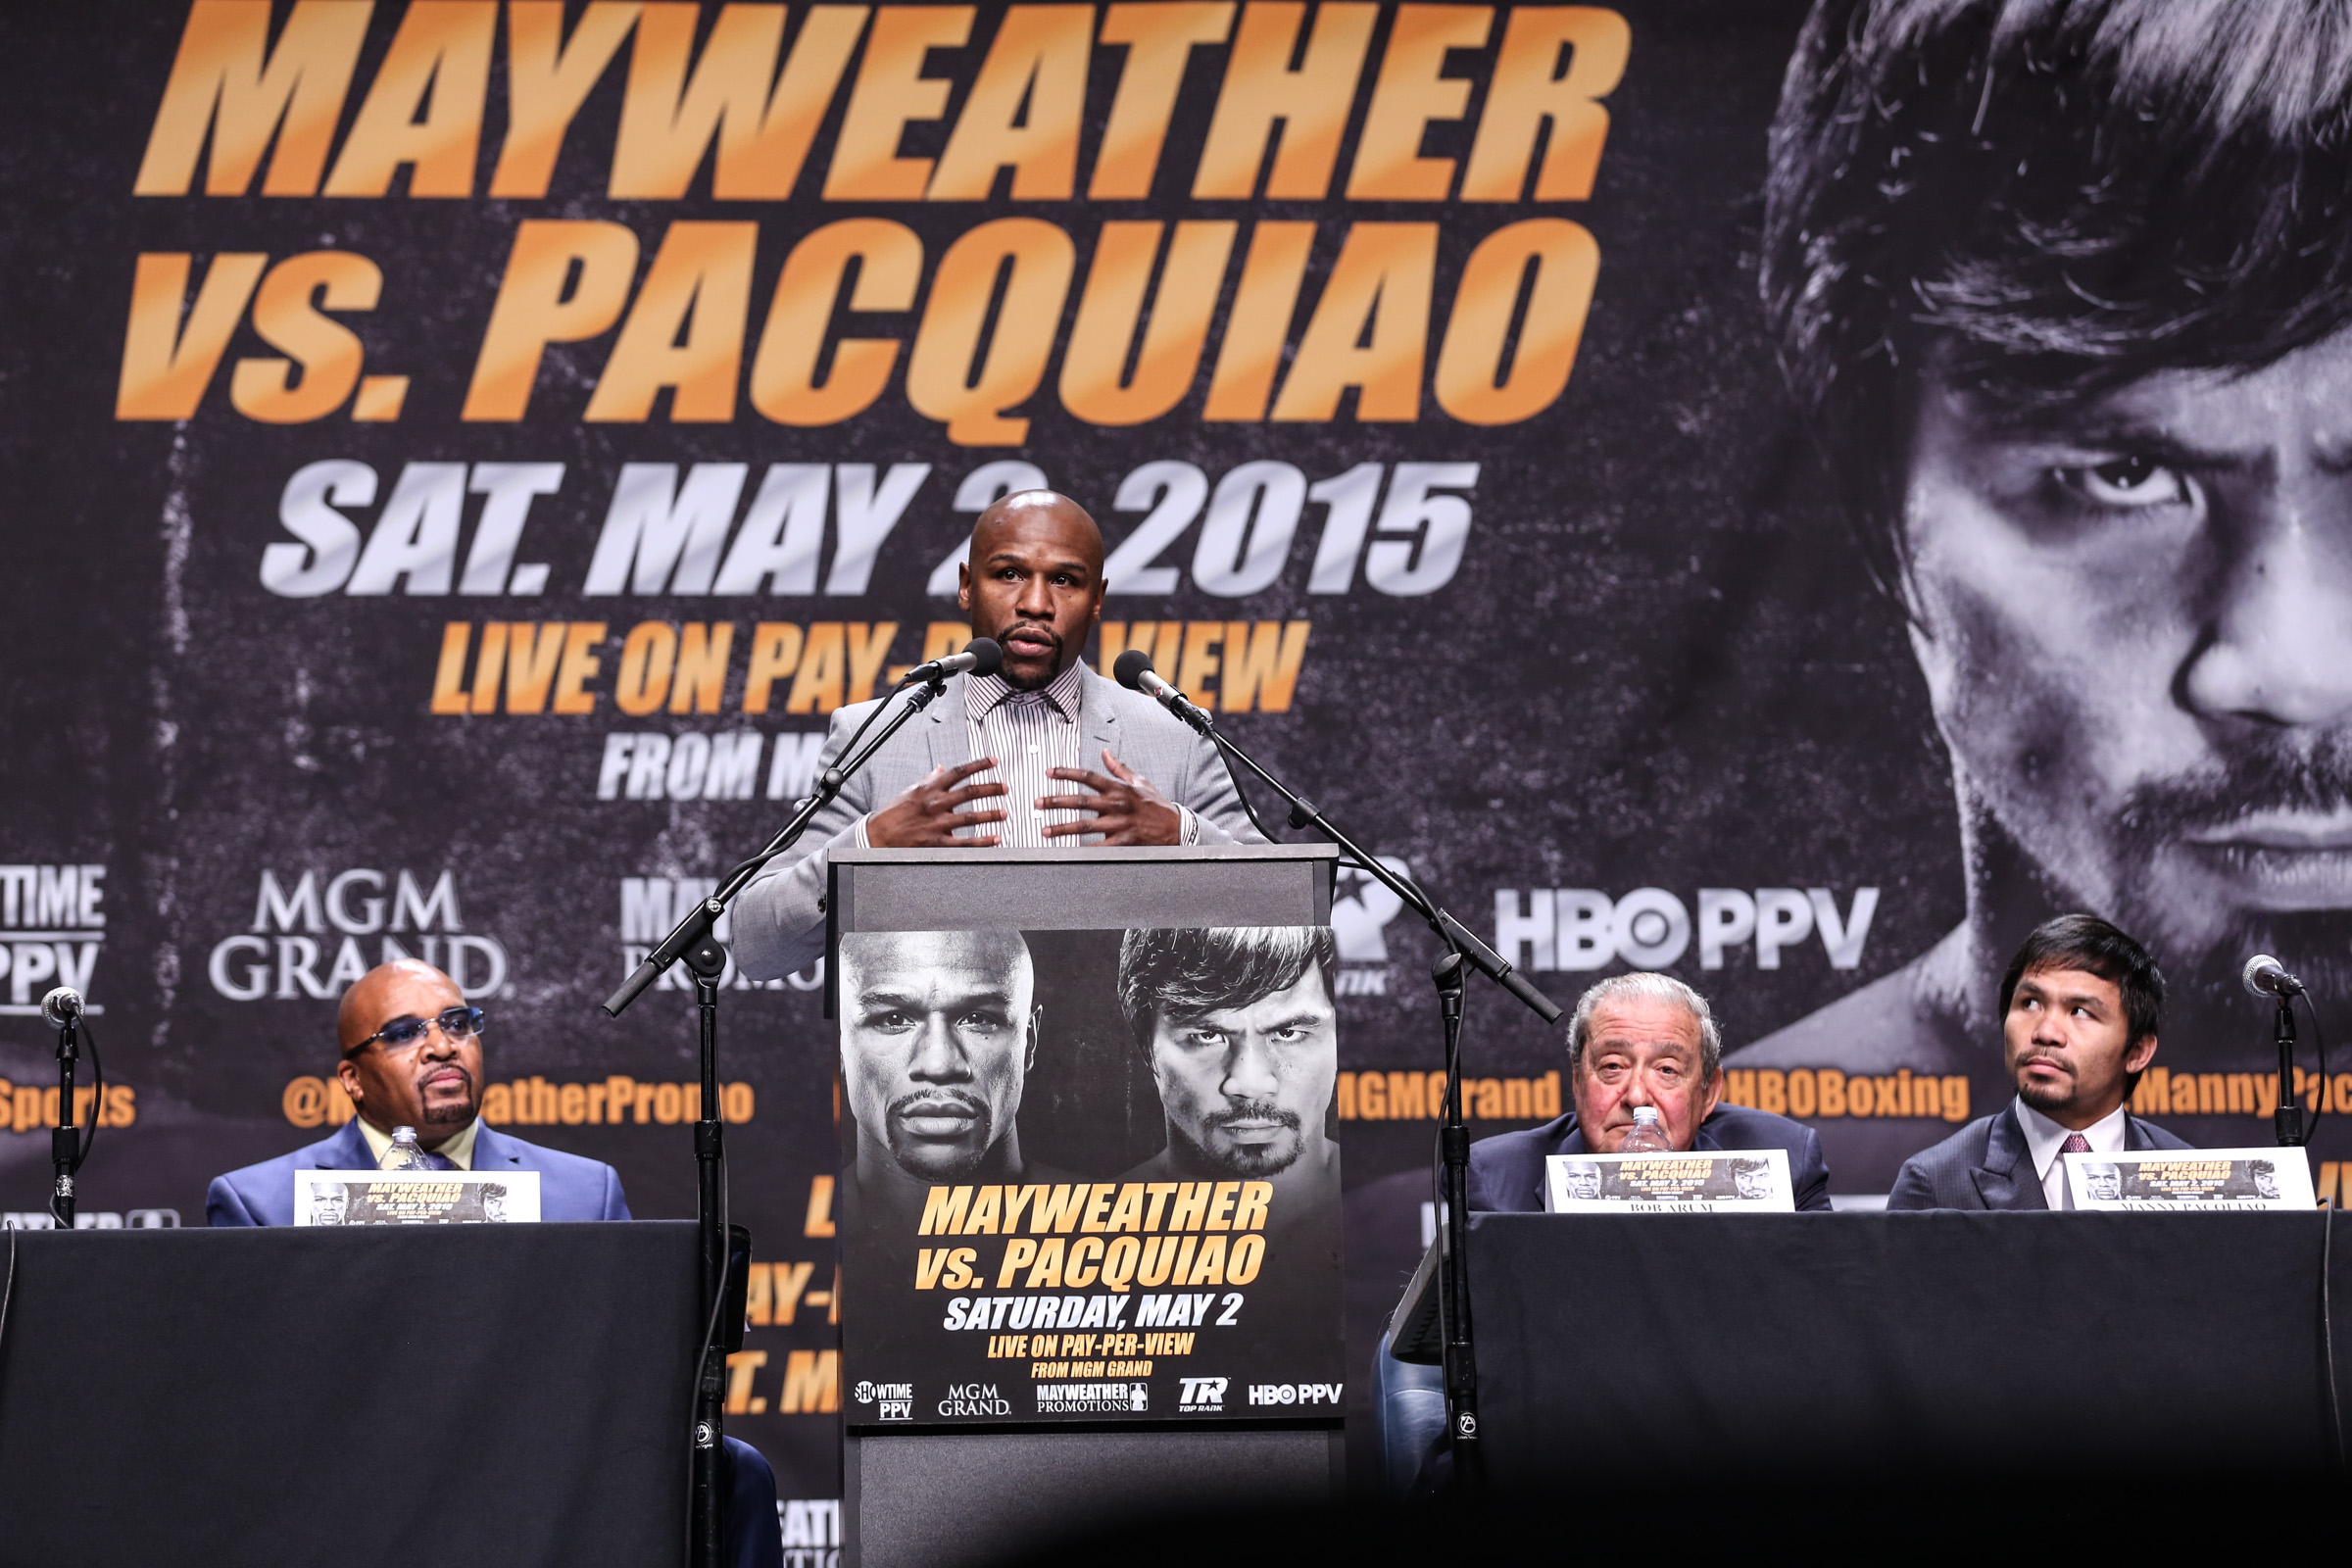 Floyd Speaks at Mayweather Pacquiao Press Conference